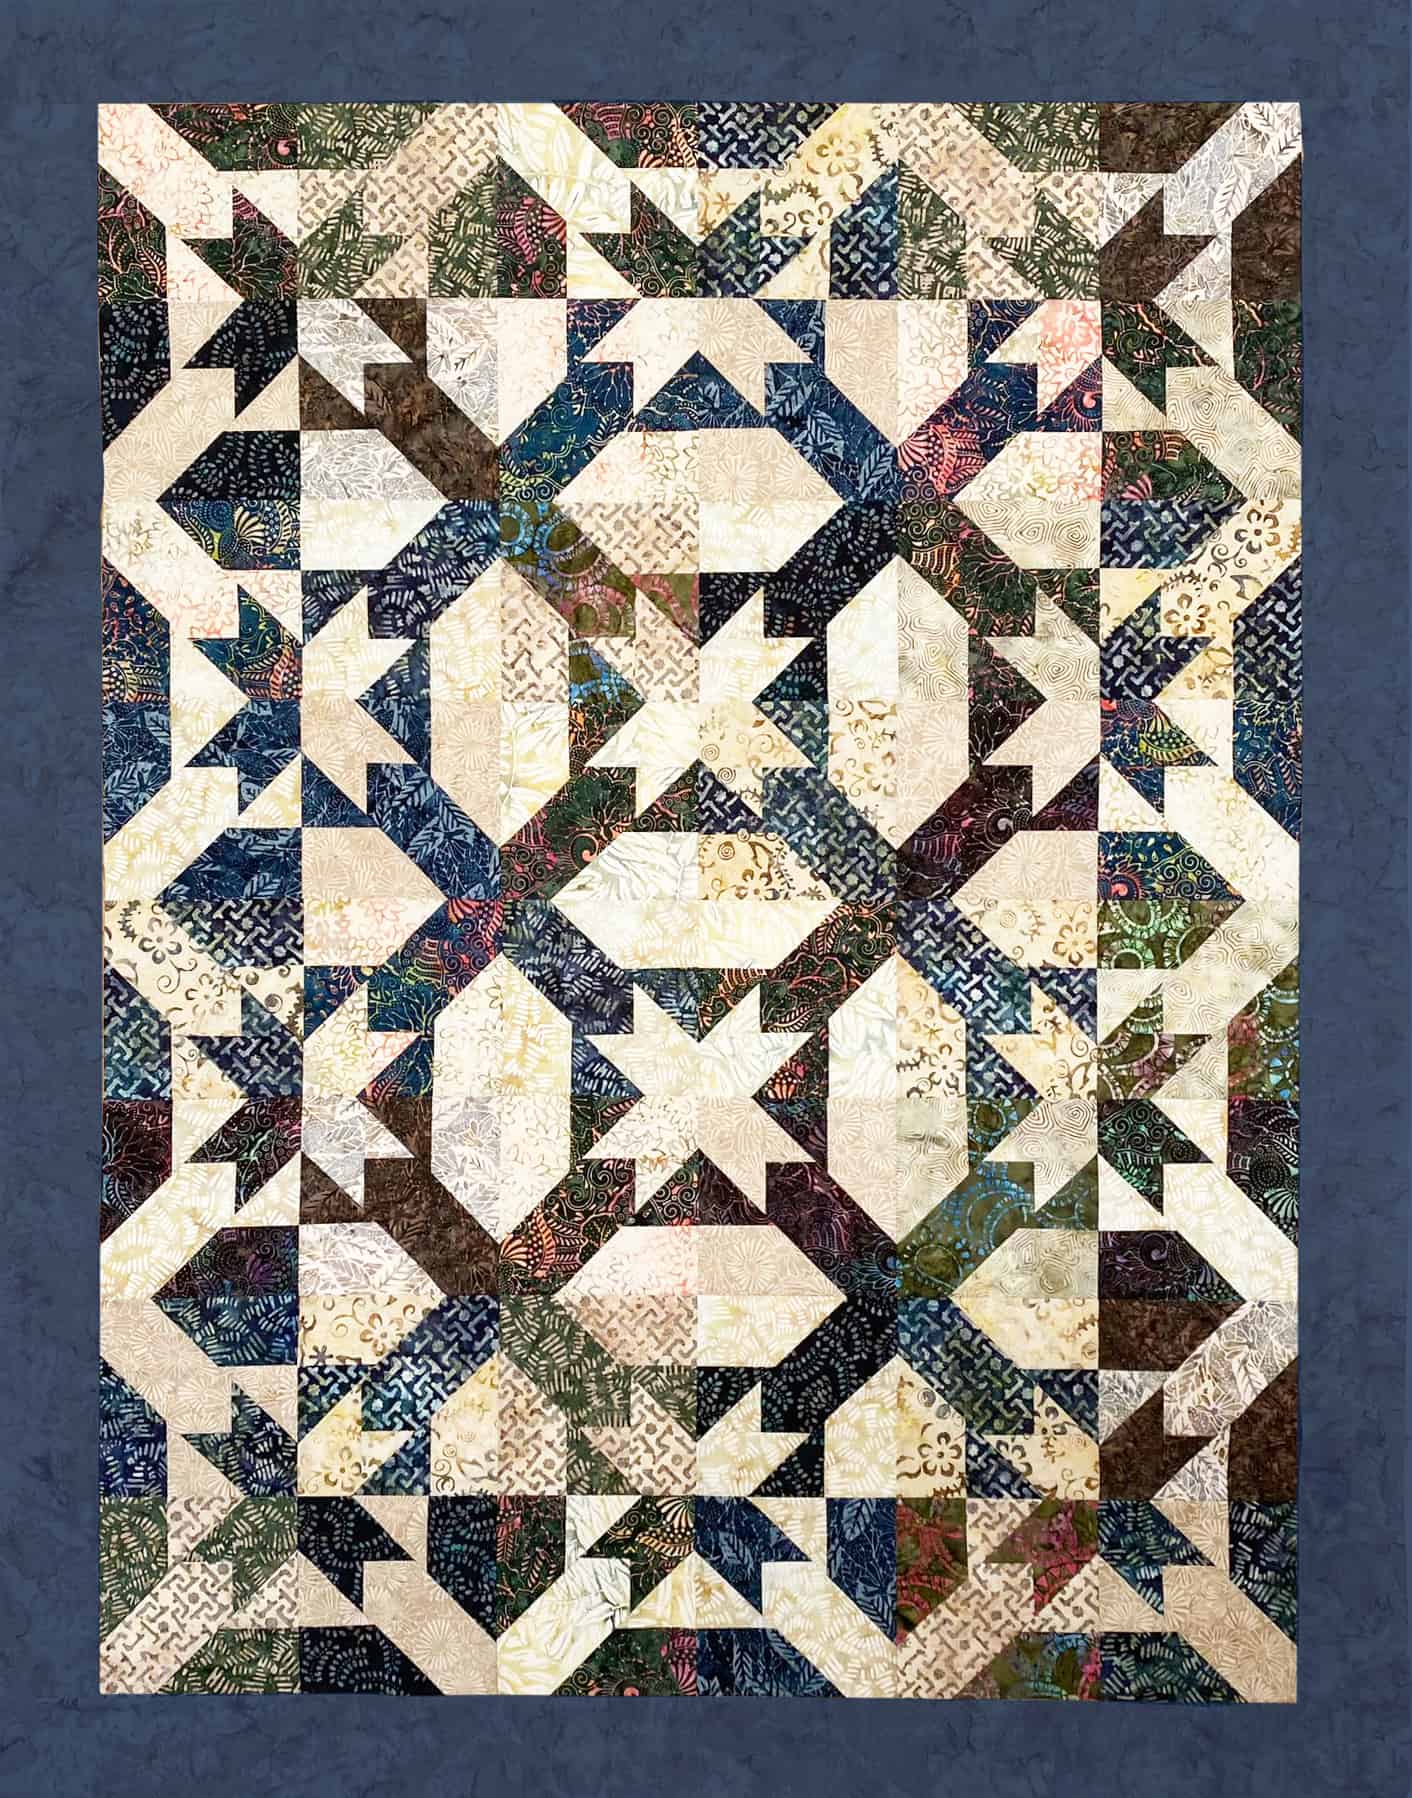 Grainline Wovens Bundle – Color Girl Quilts by Sharon McConnell